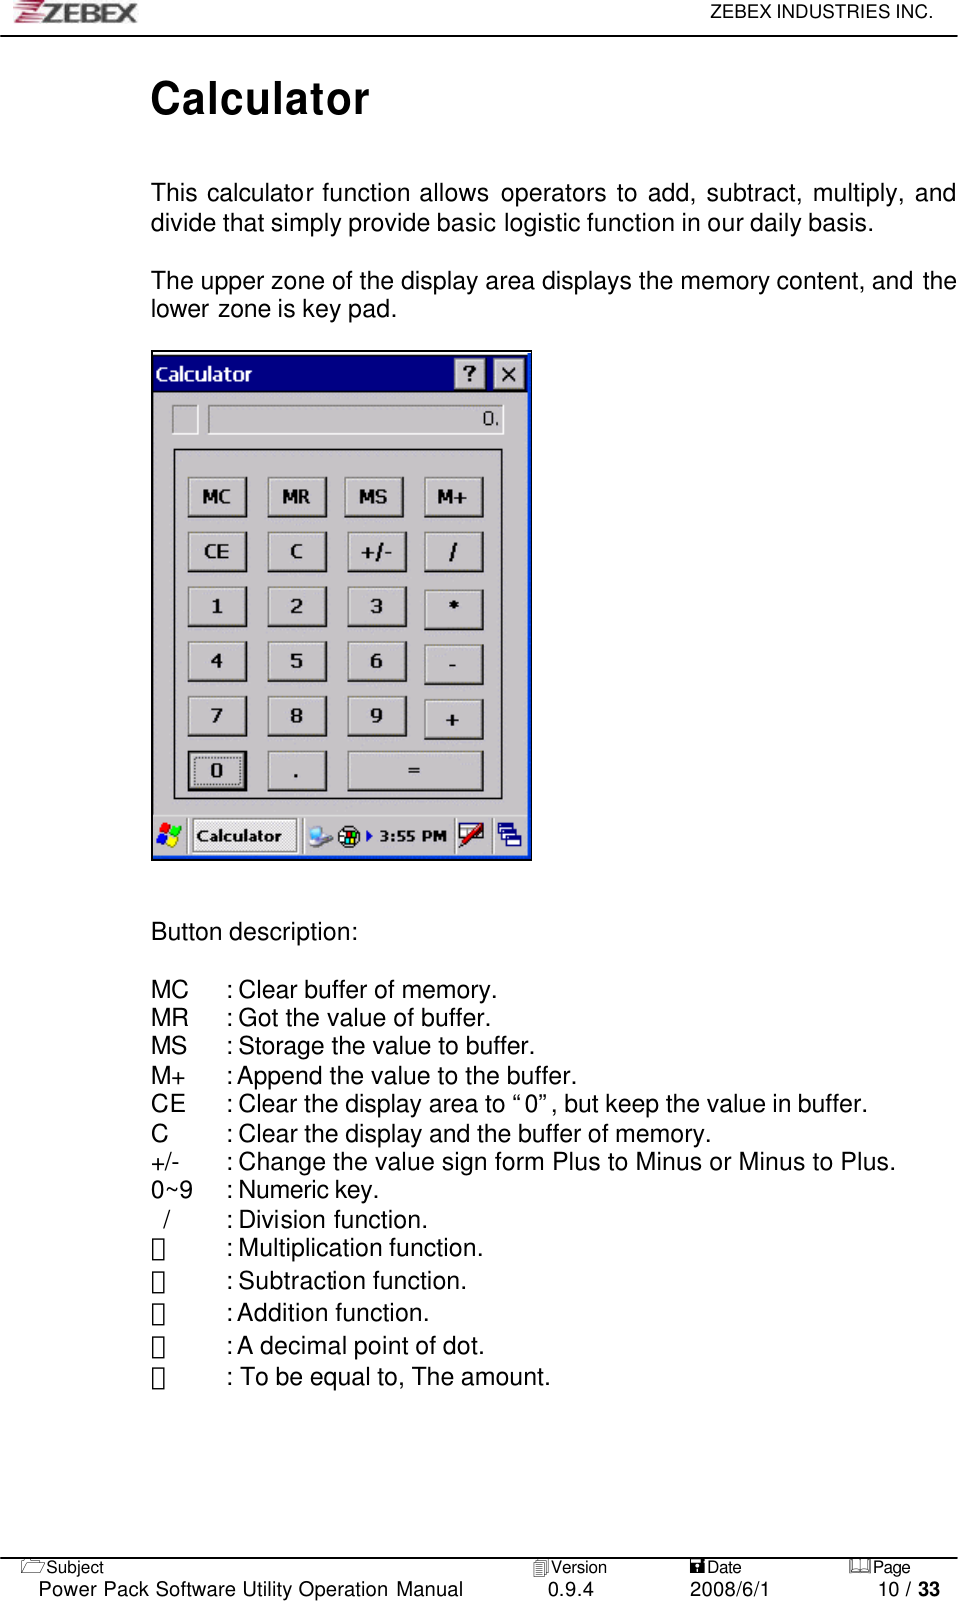     ZEBEX INDUSTRIES INC.   1Subject 4Version           =Date &amp;Page  Power Pack Software Utility Operation Manual 0.9.4    2008/6/1          10 / 33 Calculator  This calculator function allows operators to add, subtract, multiply, and divide that simply provide basic logistic function in our daily basis.    The upper zone of the display area displays the memory content, and the lower zone is key pad.        Button description:  MC : Clear buffer of memory. MR : Got the value of buffer. MS : Storage the value to buffer. M+ : Append the value to the buffer. CE : Clear the display area to “0”, but keep the value in buffer. C : Clear the display and the buffer of memory. +/- : Change the value sign form Plus to Minus or Minus to Plus. 0~9 : Numeric key. / : Division function. ＊ : Multiplication function. － : Subtraction function. ＋ : Addition function. ﹒ : A decimal point of dot. ＝ : To be equal to, The amount.     